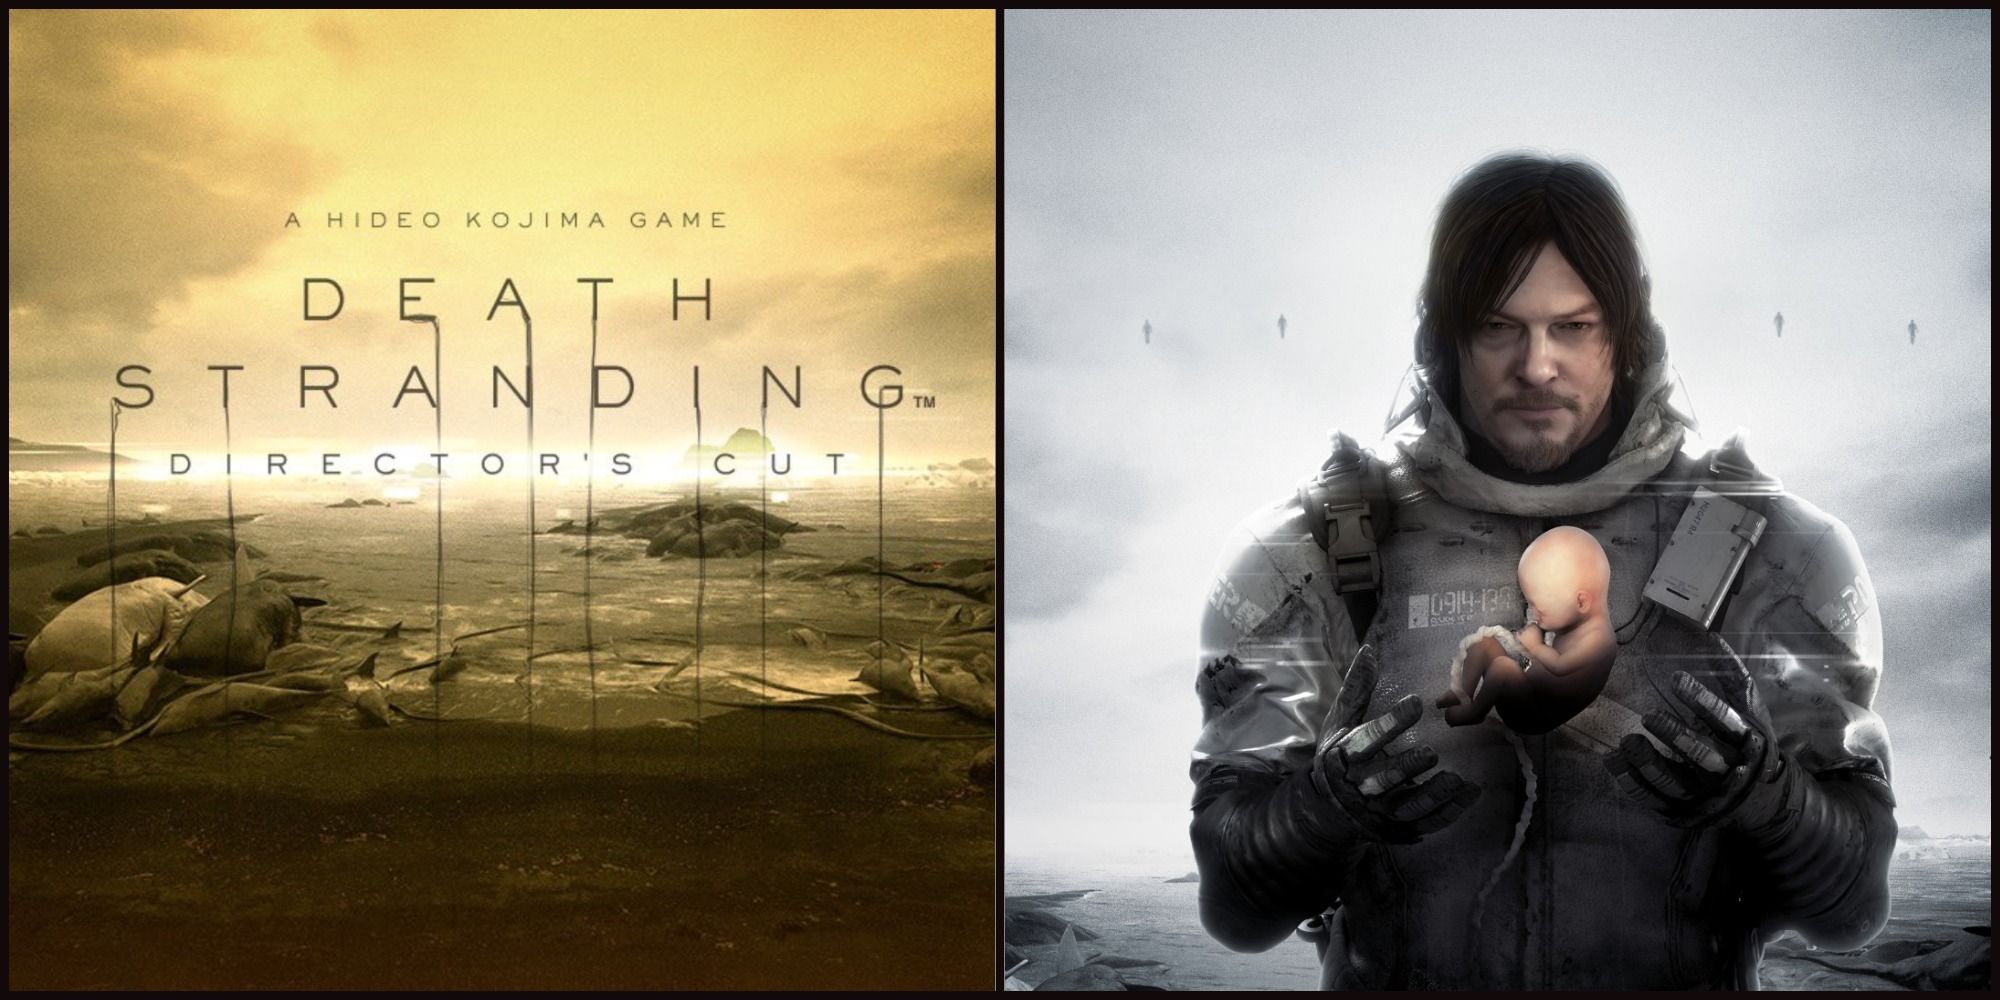 Split Image. Death Stranding Director's Cut Logo on the left with beached whales in the background with a gold filter. On the right, Sam Porter Holding BB out of its pod with a silver filter